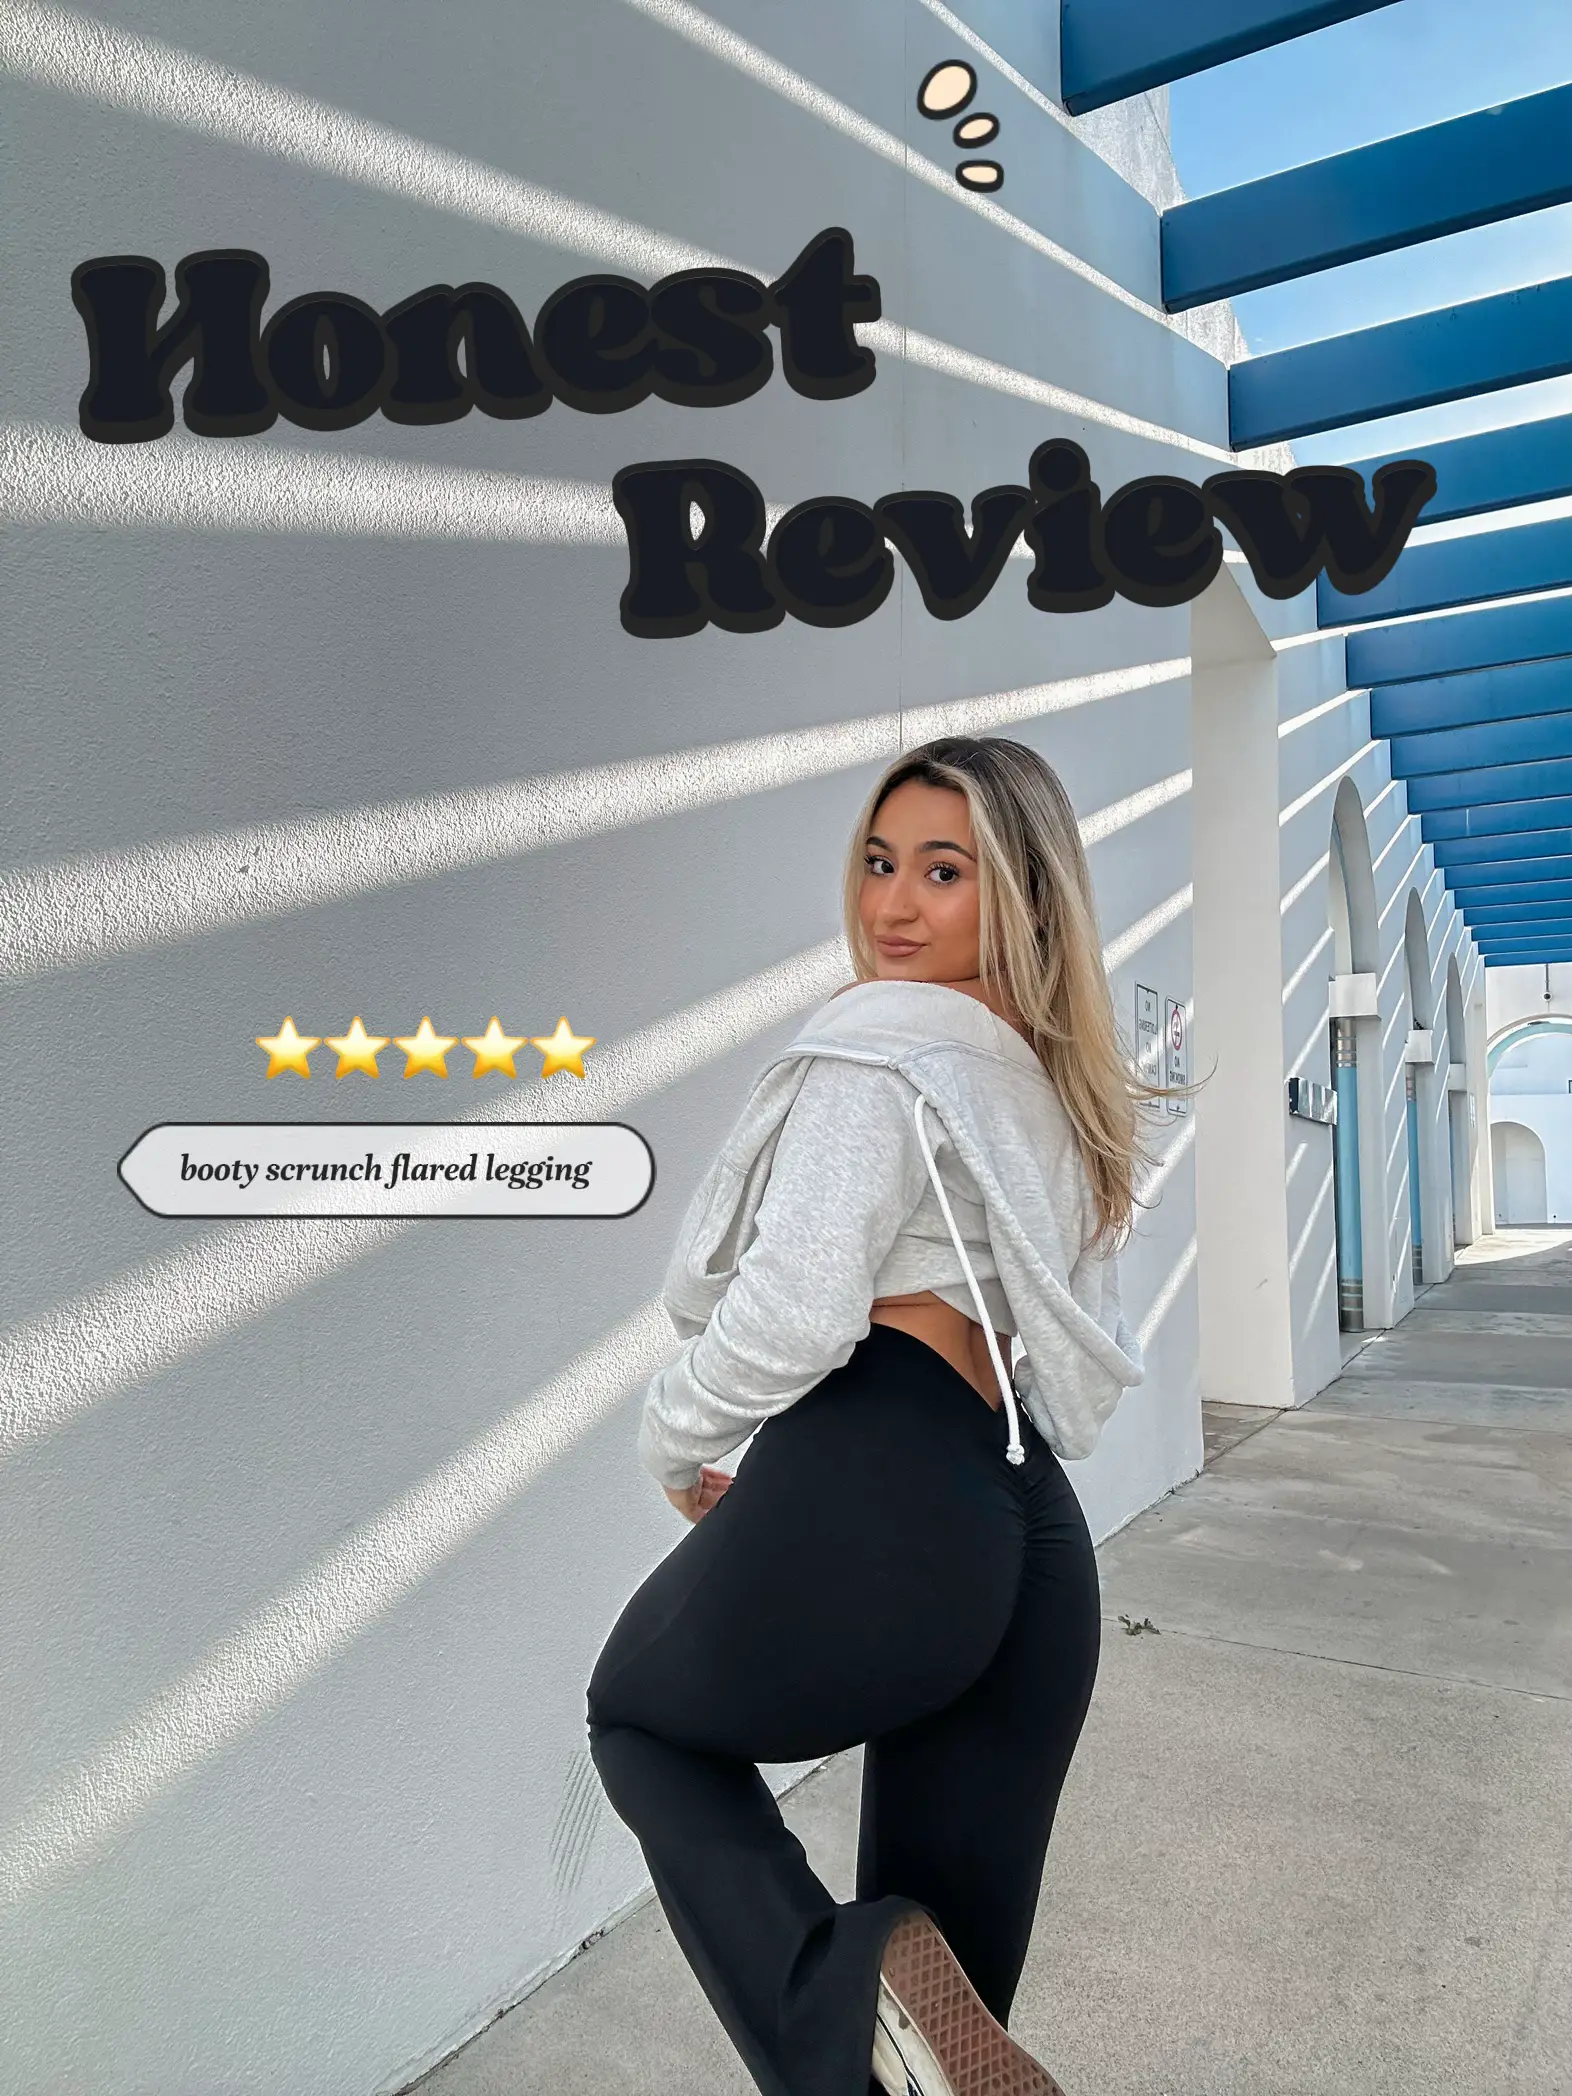 NORMOV 4 Piece Butt Lifting Workout Leggings for Women, Seamless Gym  Scrunch Booty Lifting Sets